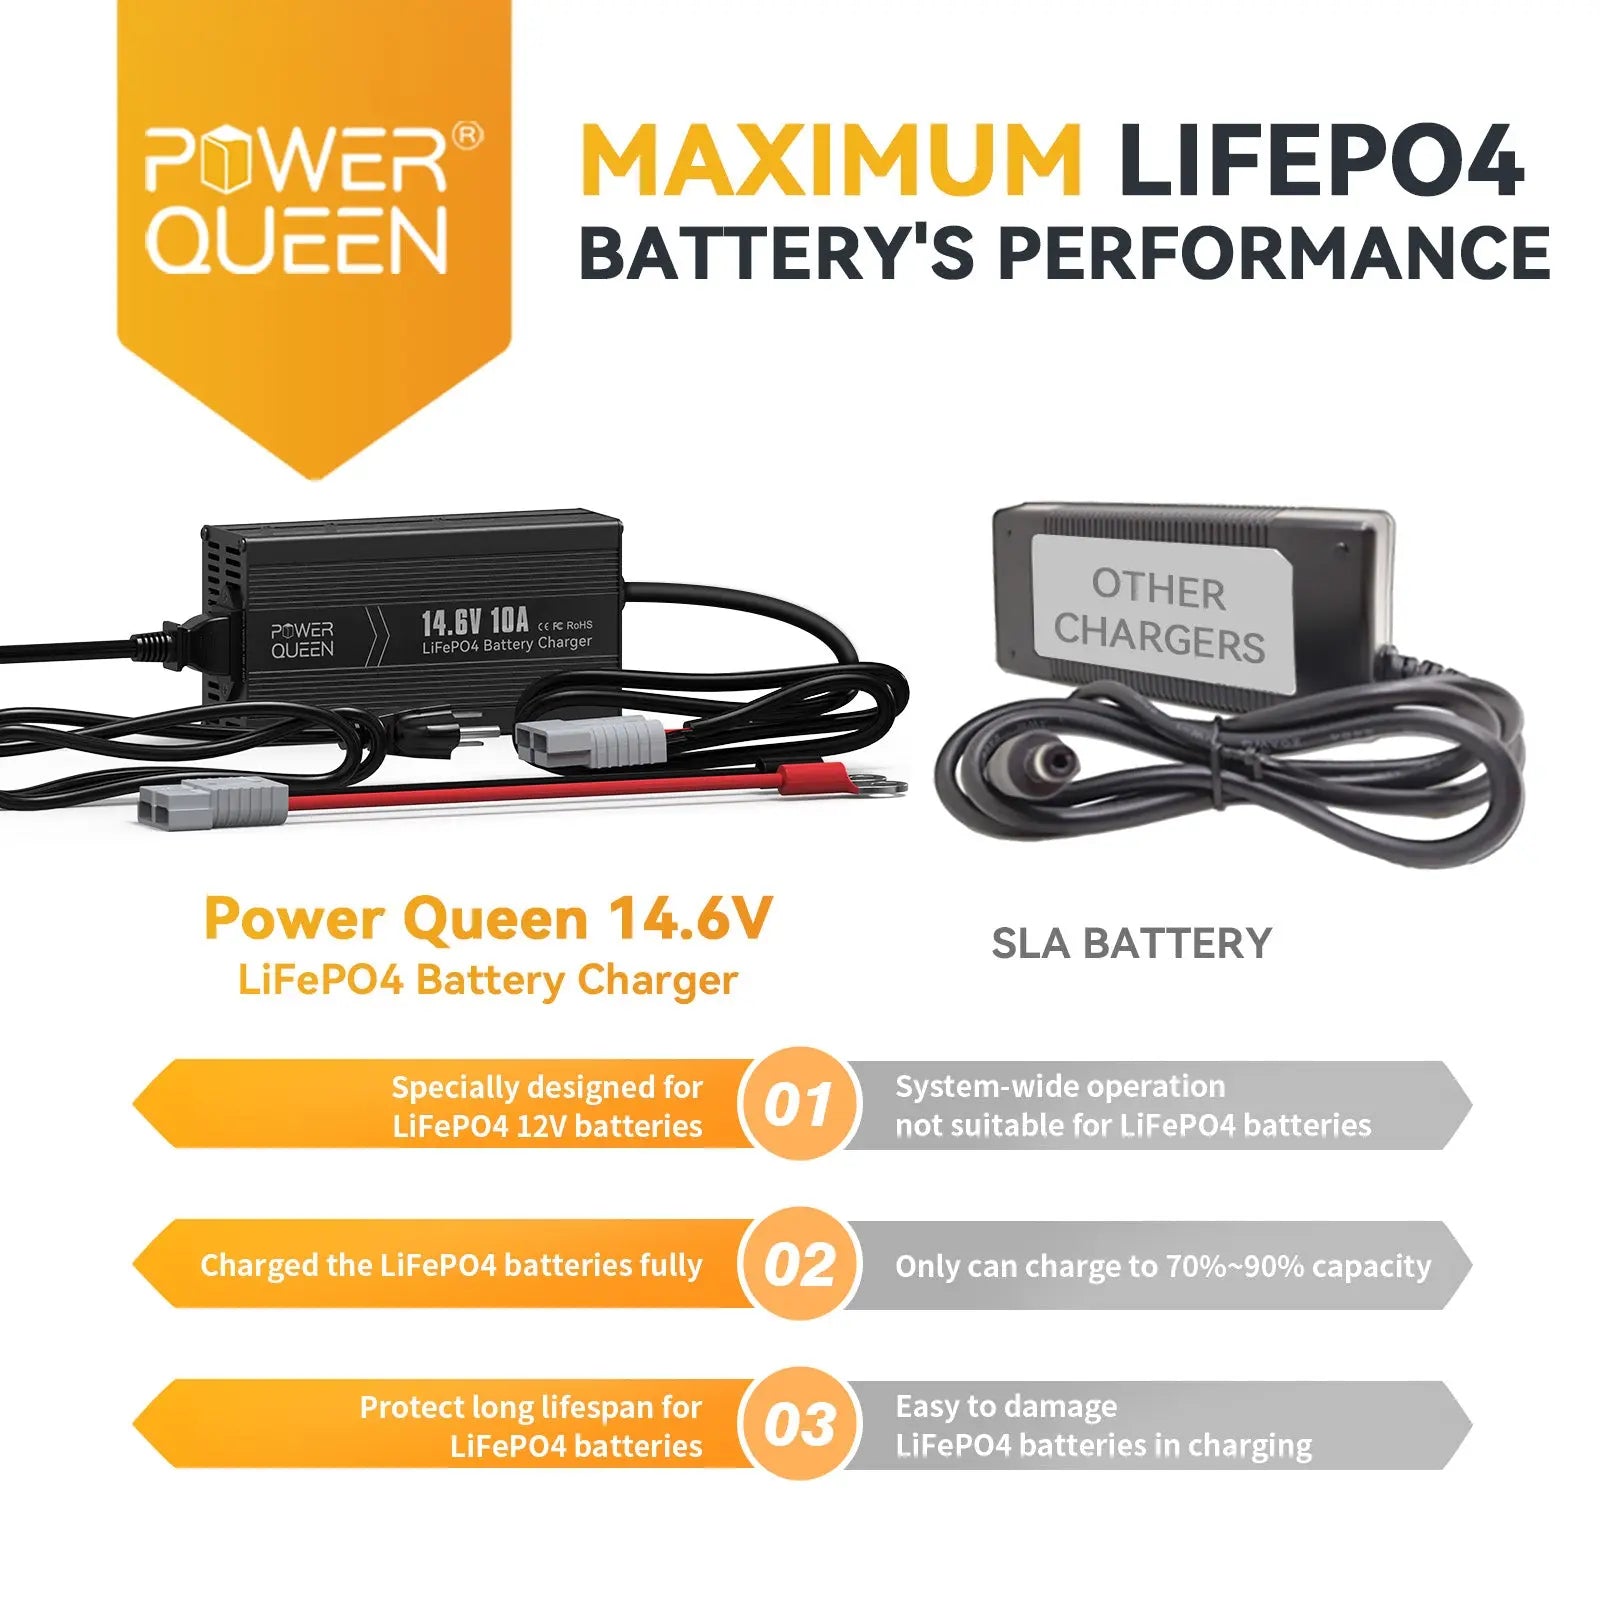 Power Queen 14.6V 10A LiFePO4 Battery Charger